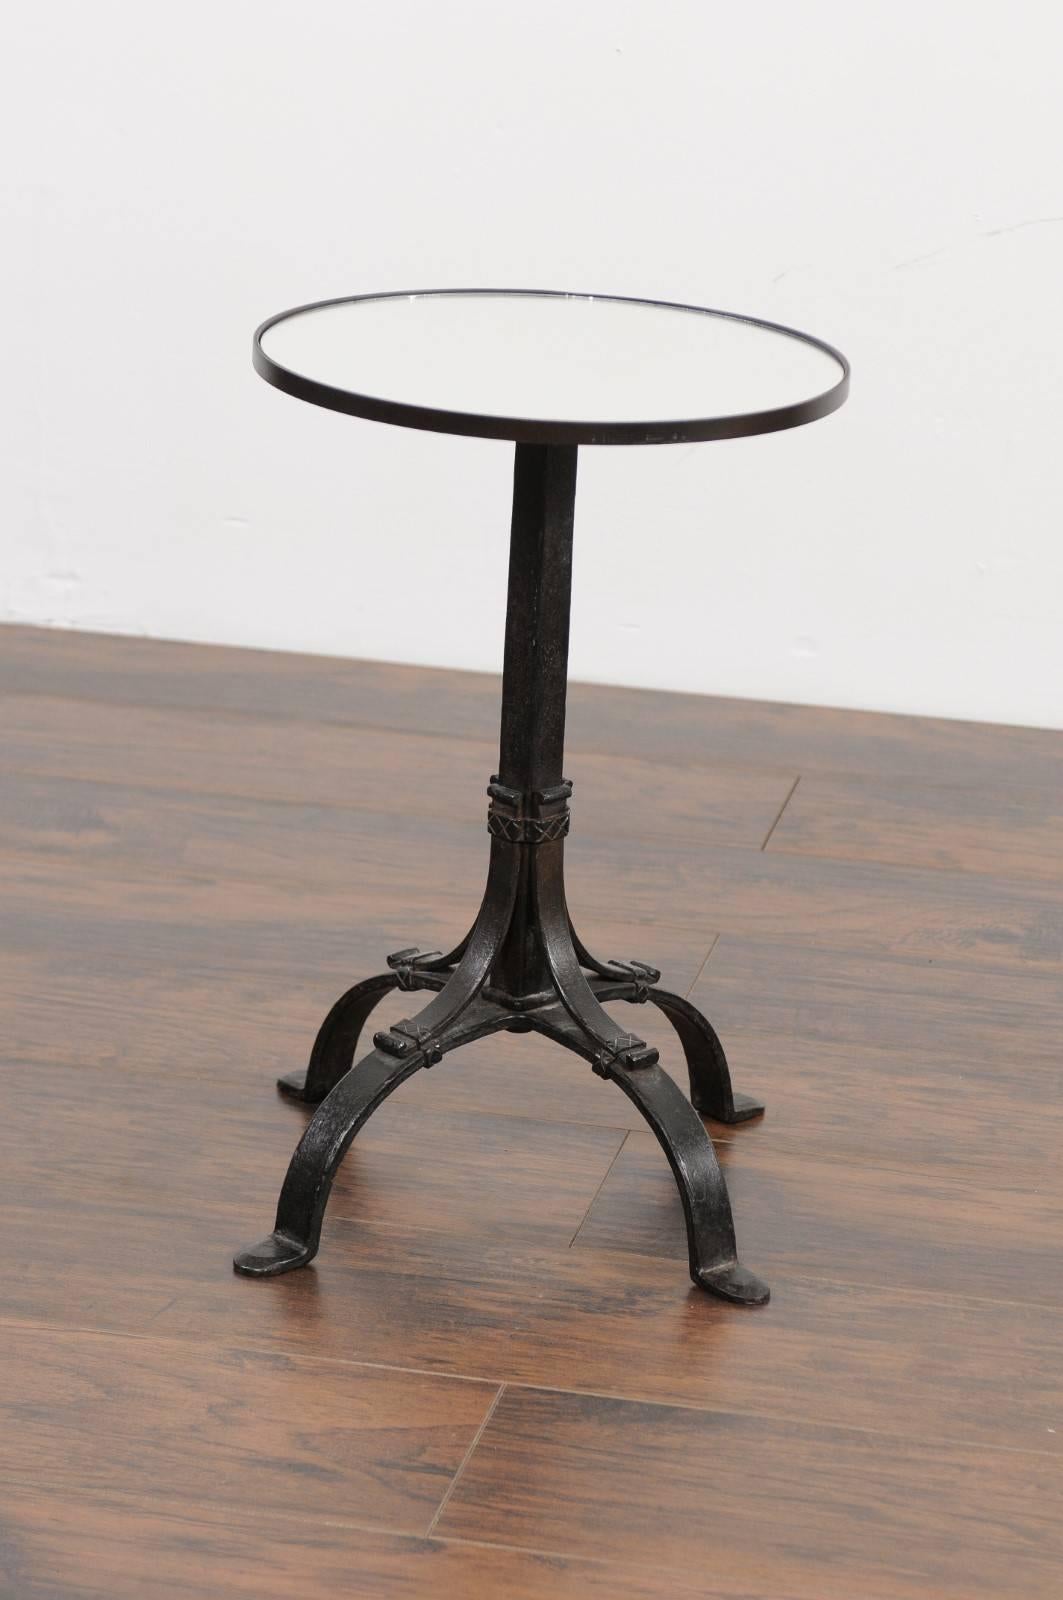 A French black iron round drink table from the early 20th century, with new mirrored top. Born during the Roaring Twenties, this French drink table features a circular top, securing a new custom-made clear mirror. The table is raised on an iron